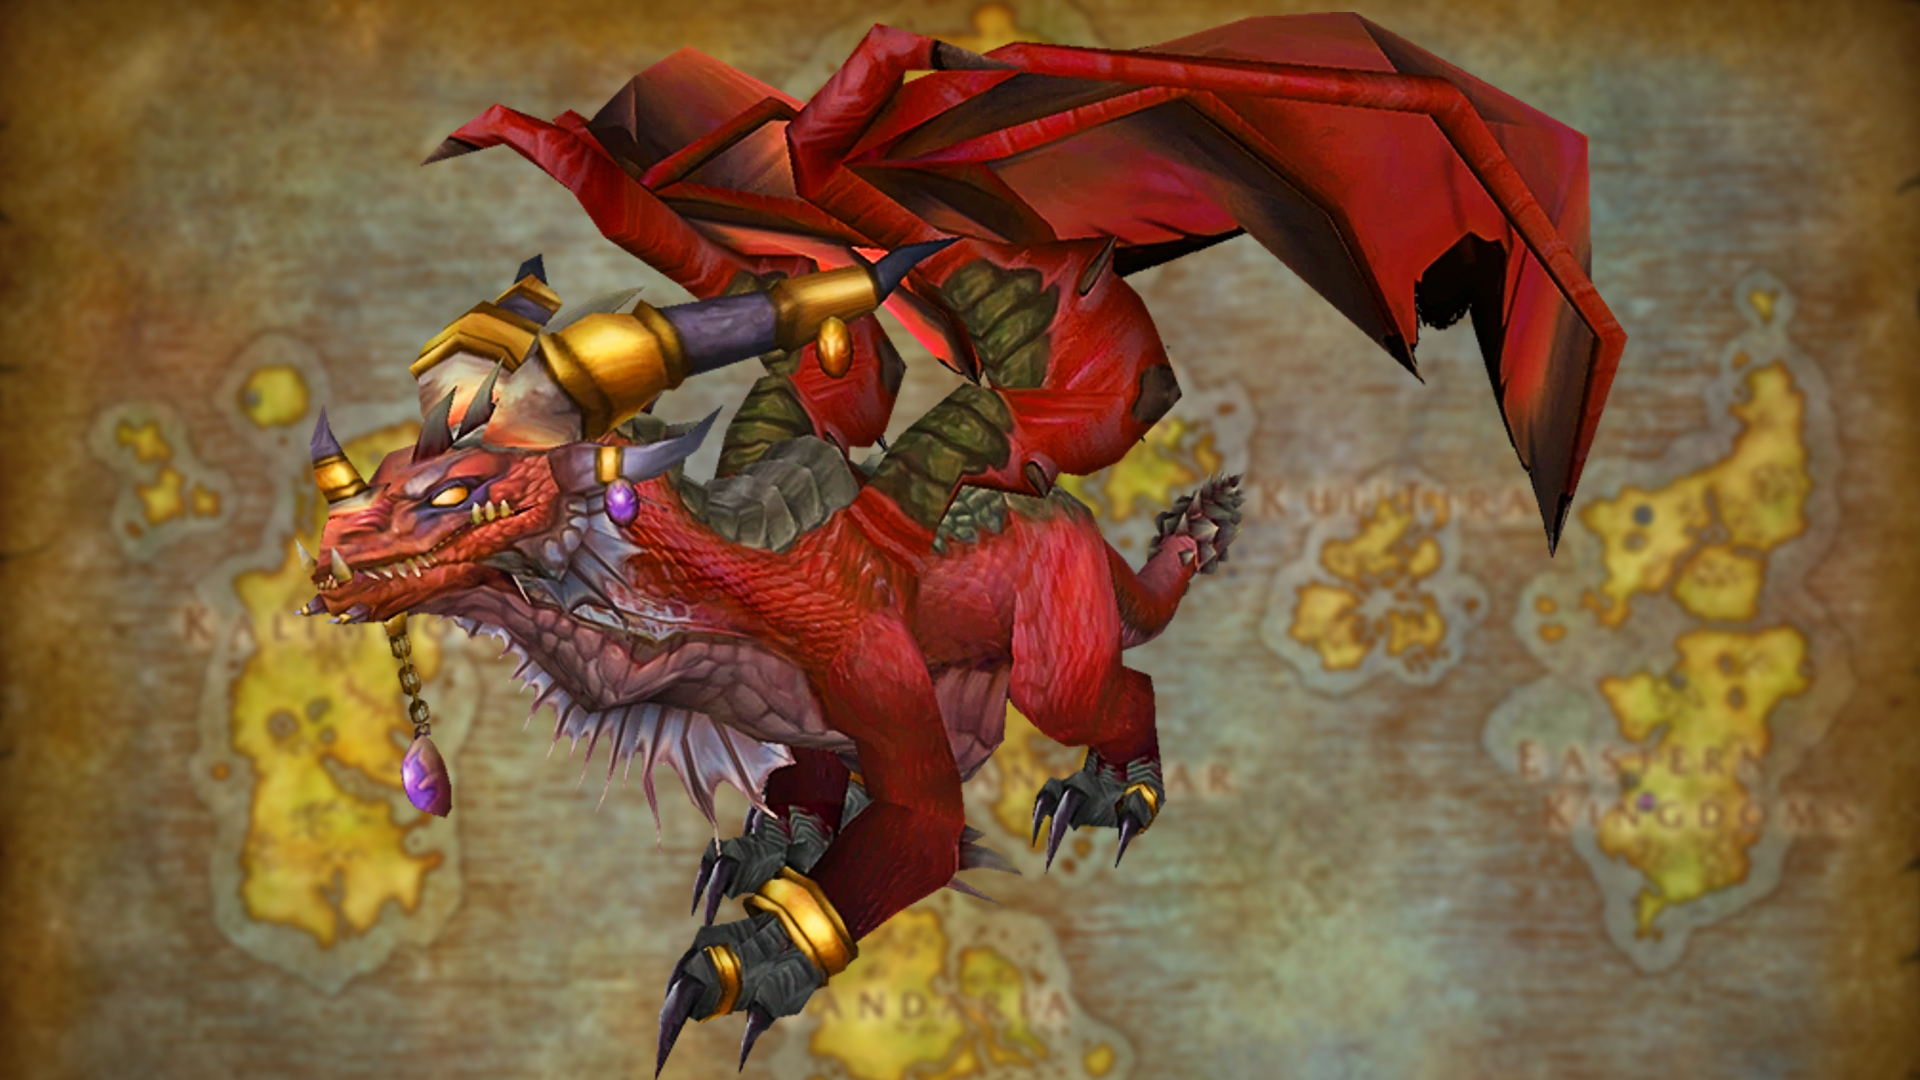 WoW Dragonflight map adds massive changes to Kalimdor